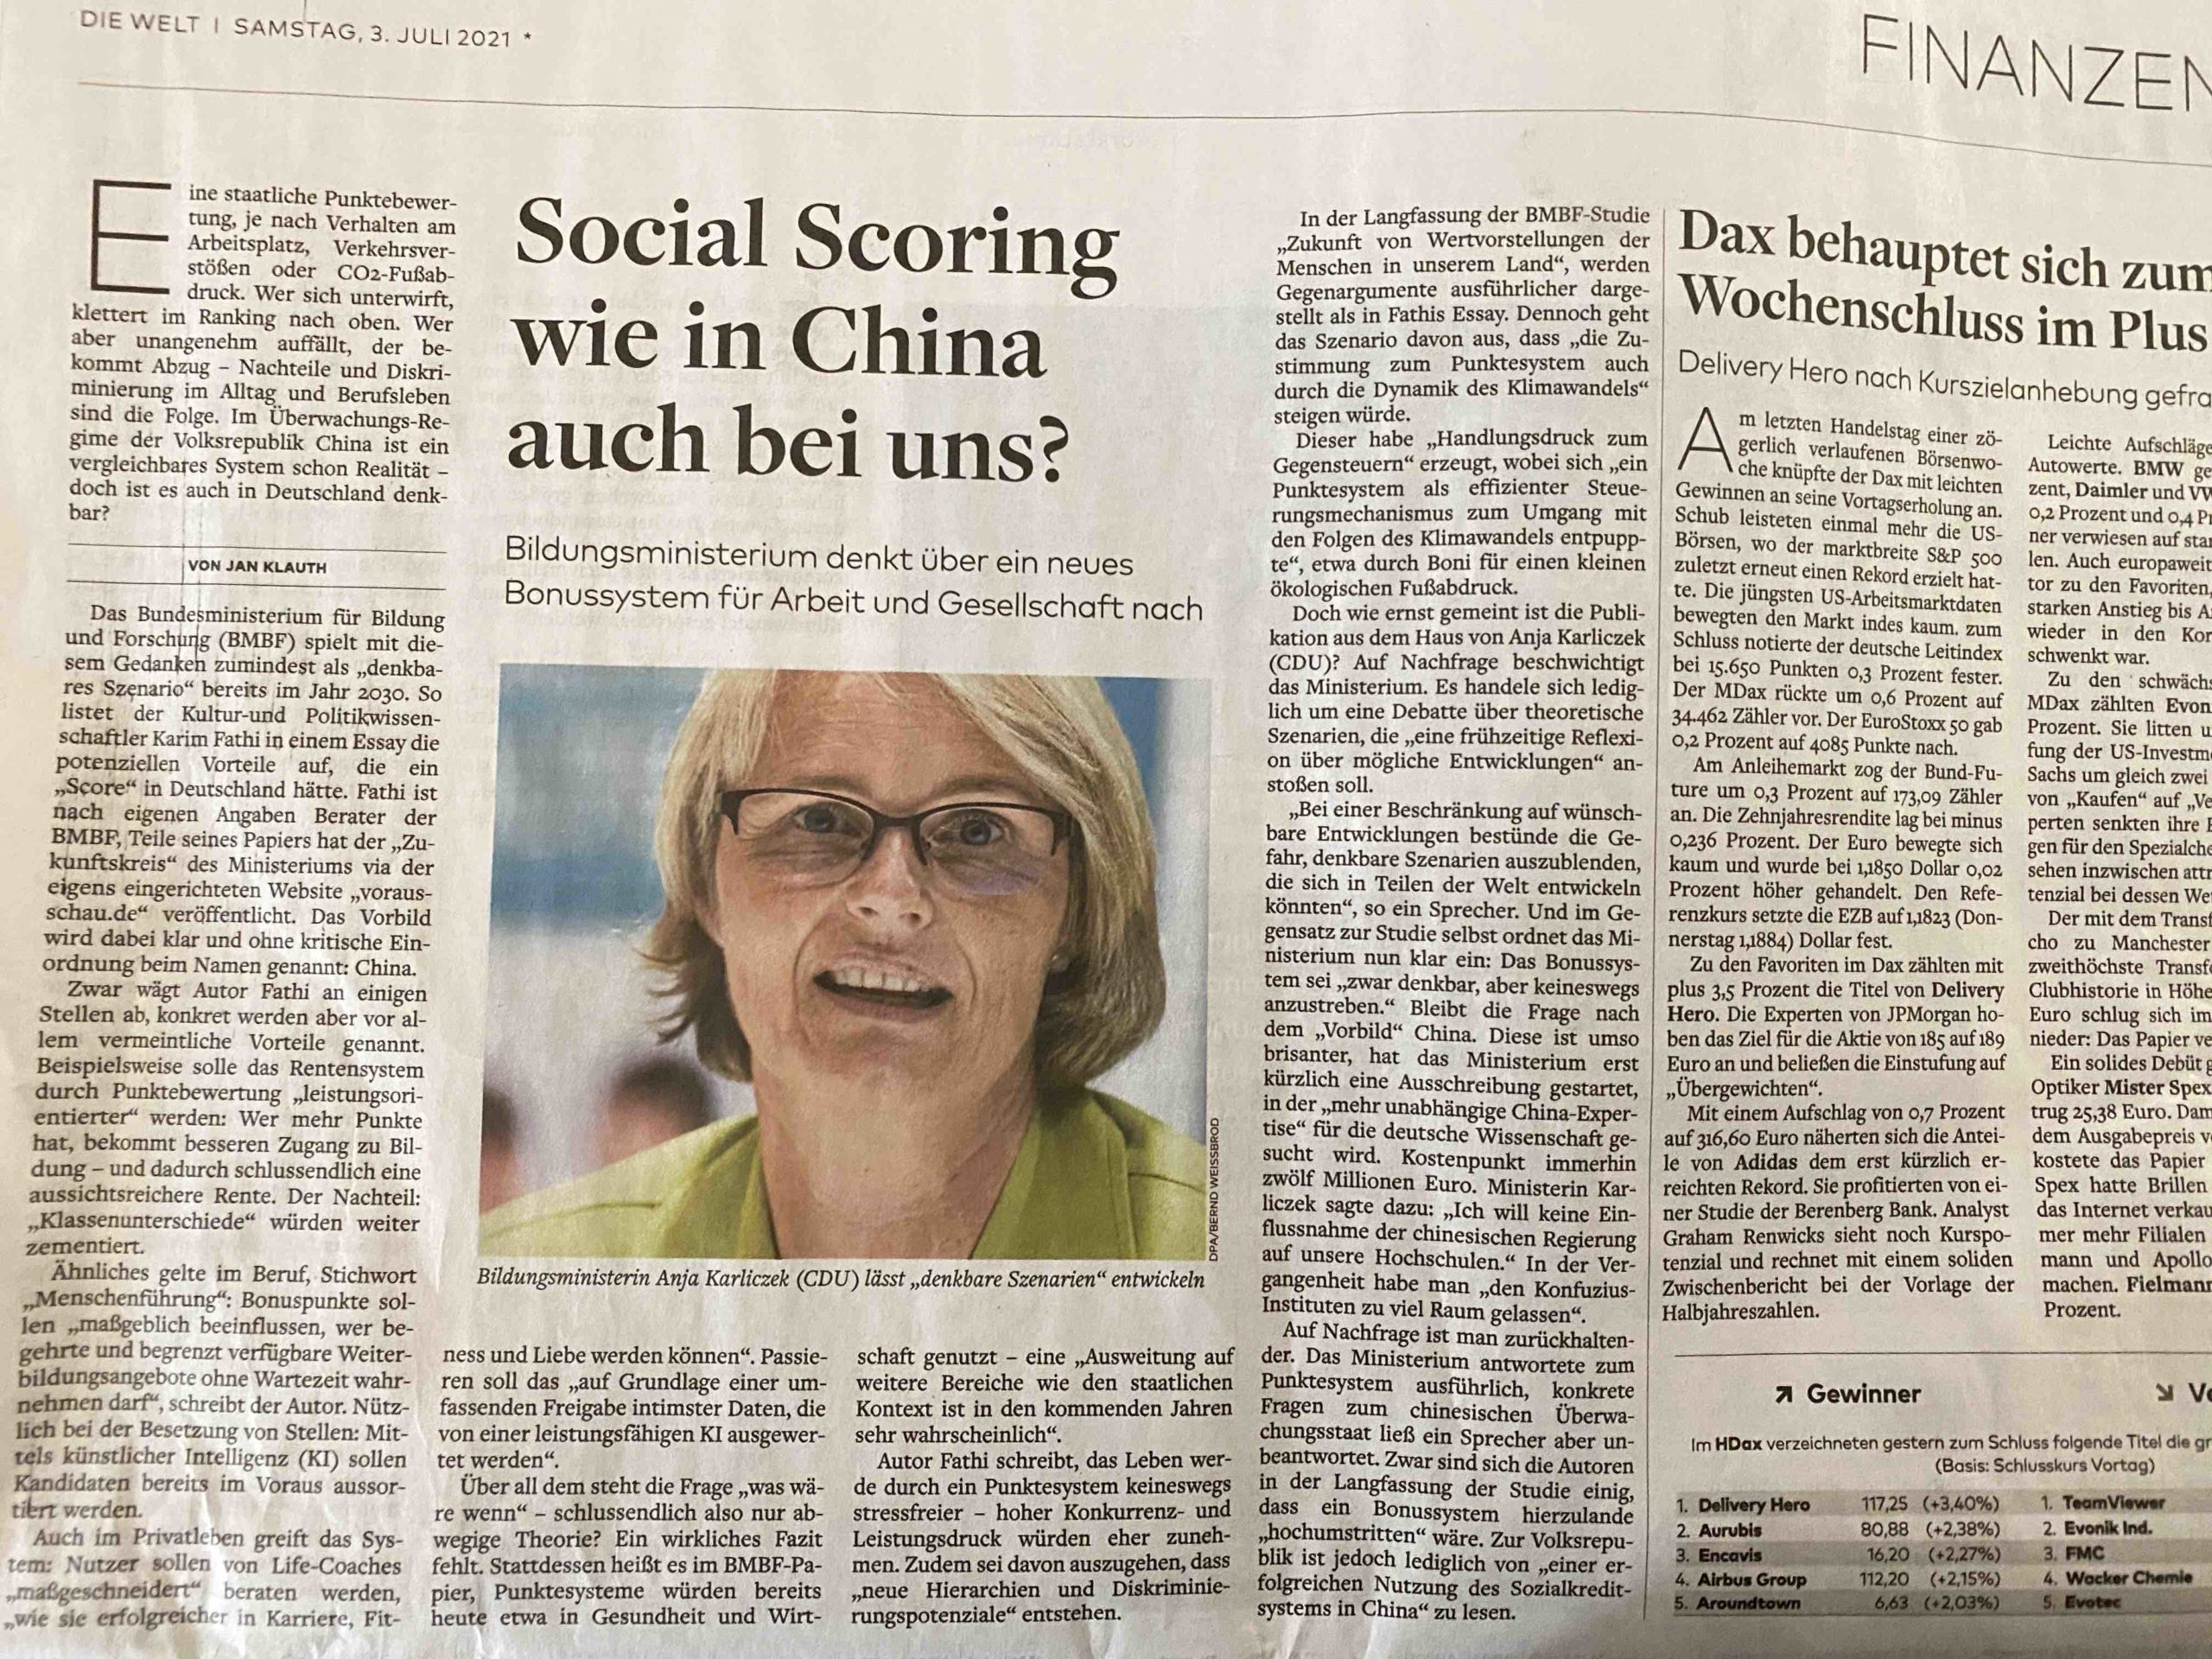 Social Credit System auch bei uns